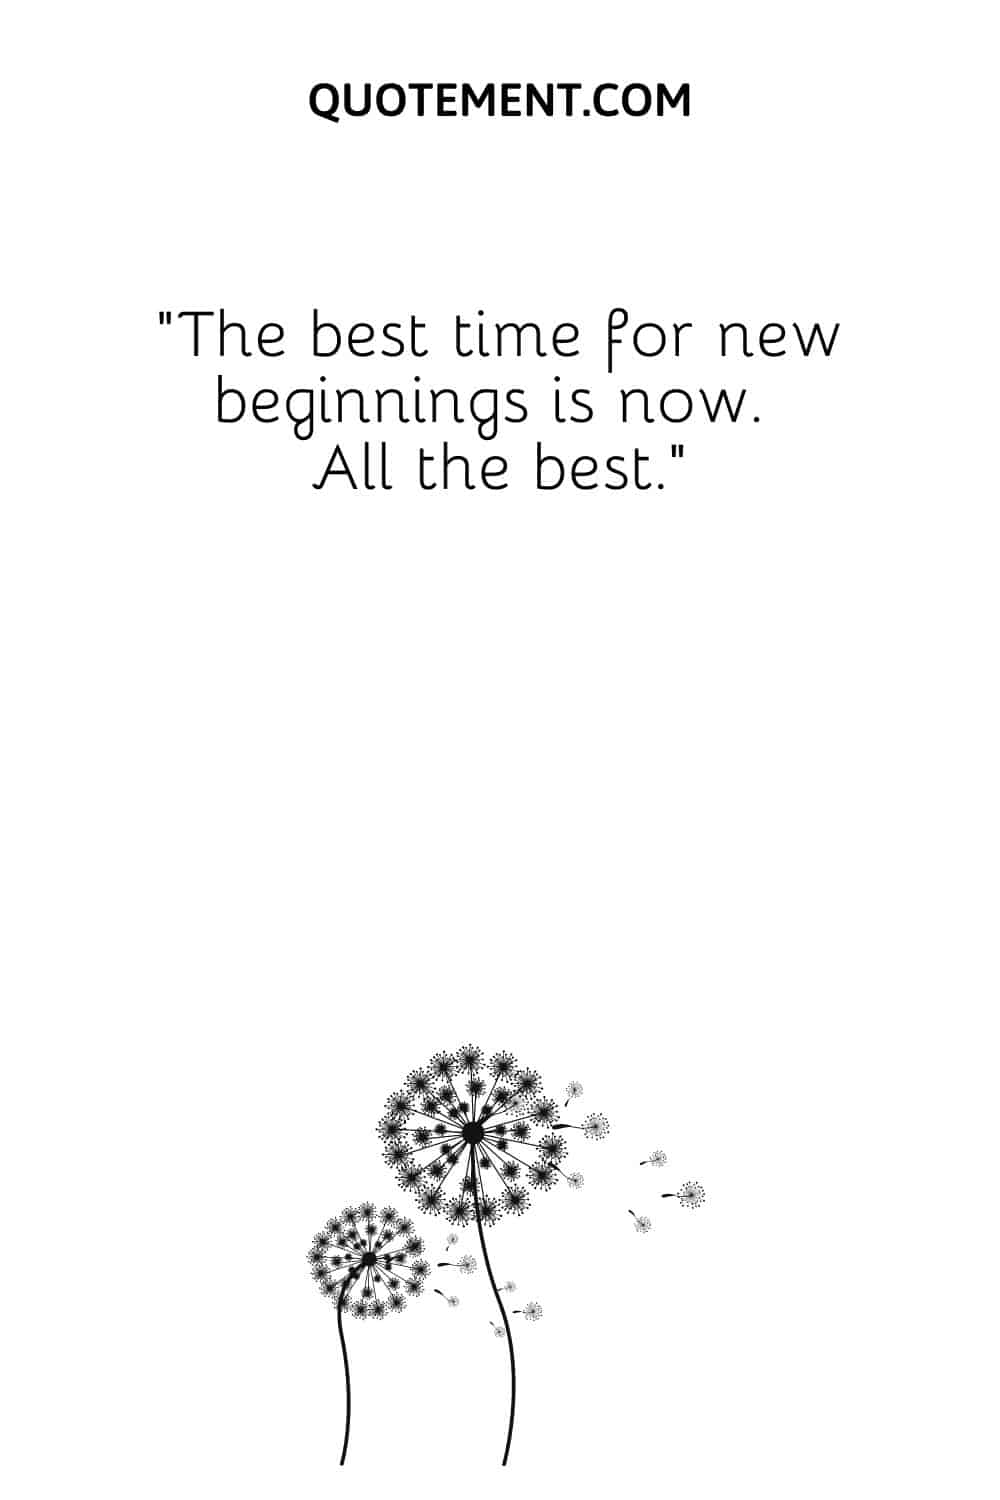 The best time for new beginnings is now